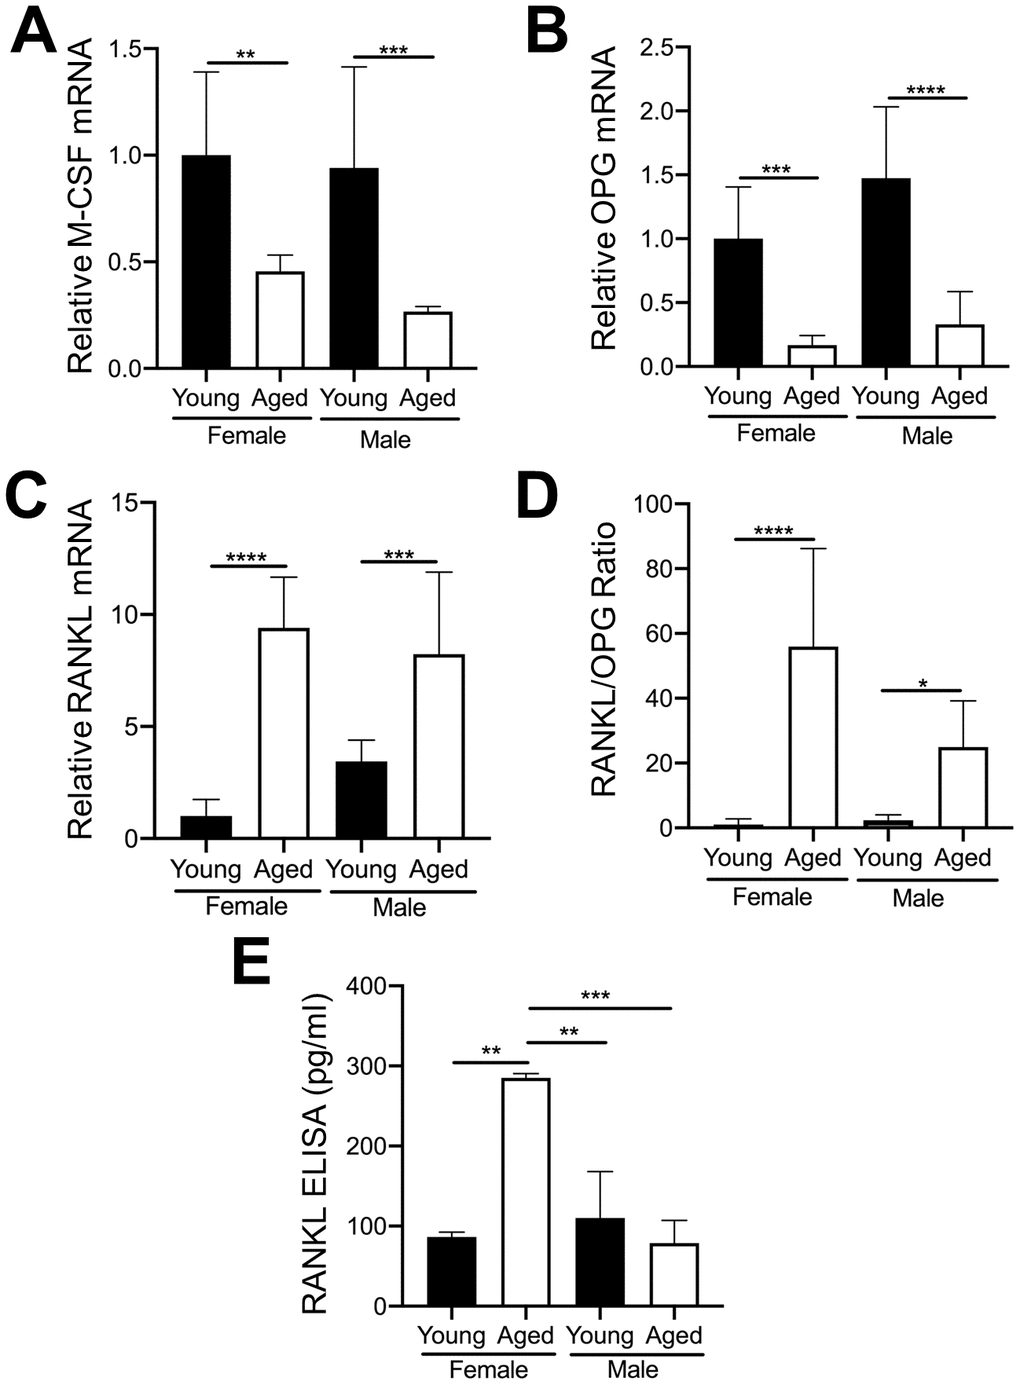 Expression of key OC factors in MKs from young and aged mice. (A–D) MKs were prepared from the bone marrow of young and aged, male and female mice using a BSA gradient and used for mRNA expression analyses by real-time PCR. (A) M-CSF mRNA (Ct cycle range was 25.2–30.12). (B) OPG mRNA (Ct range 35.09–39.53). (C) RANKL mRNA (Ct range 28.6–35.5). (D) The RANKL/OPG ratio was calculated for young and aged, male and female MKs (N=4-5/group). (E) RANKL concentrations in MK CM was quantified by ELISA. MK CM from aged females was significantly higher than MK CM from young females. P-values were calculated by one-way ANOVA followed by Tukey’s post-hoc test and the data are presented as mean ± SD. (*p0.05, **p0.01, ***p0.001, ****p0.0001).